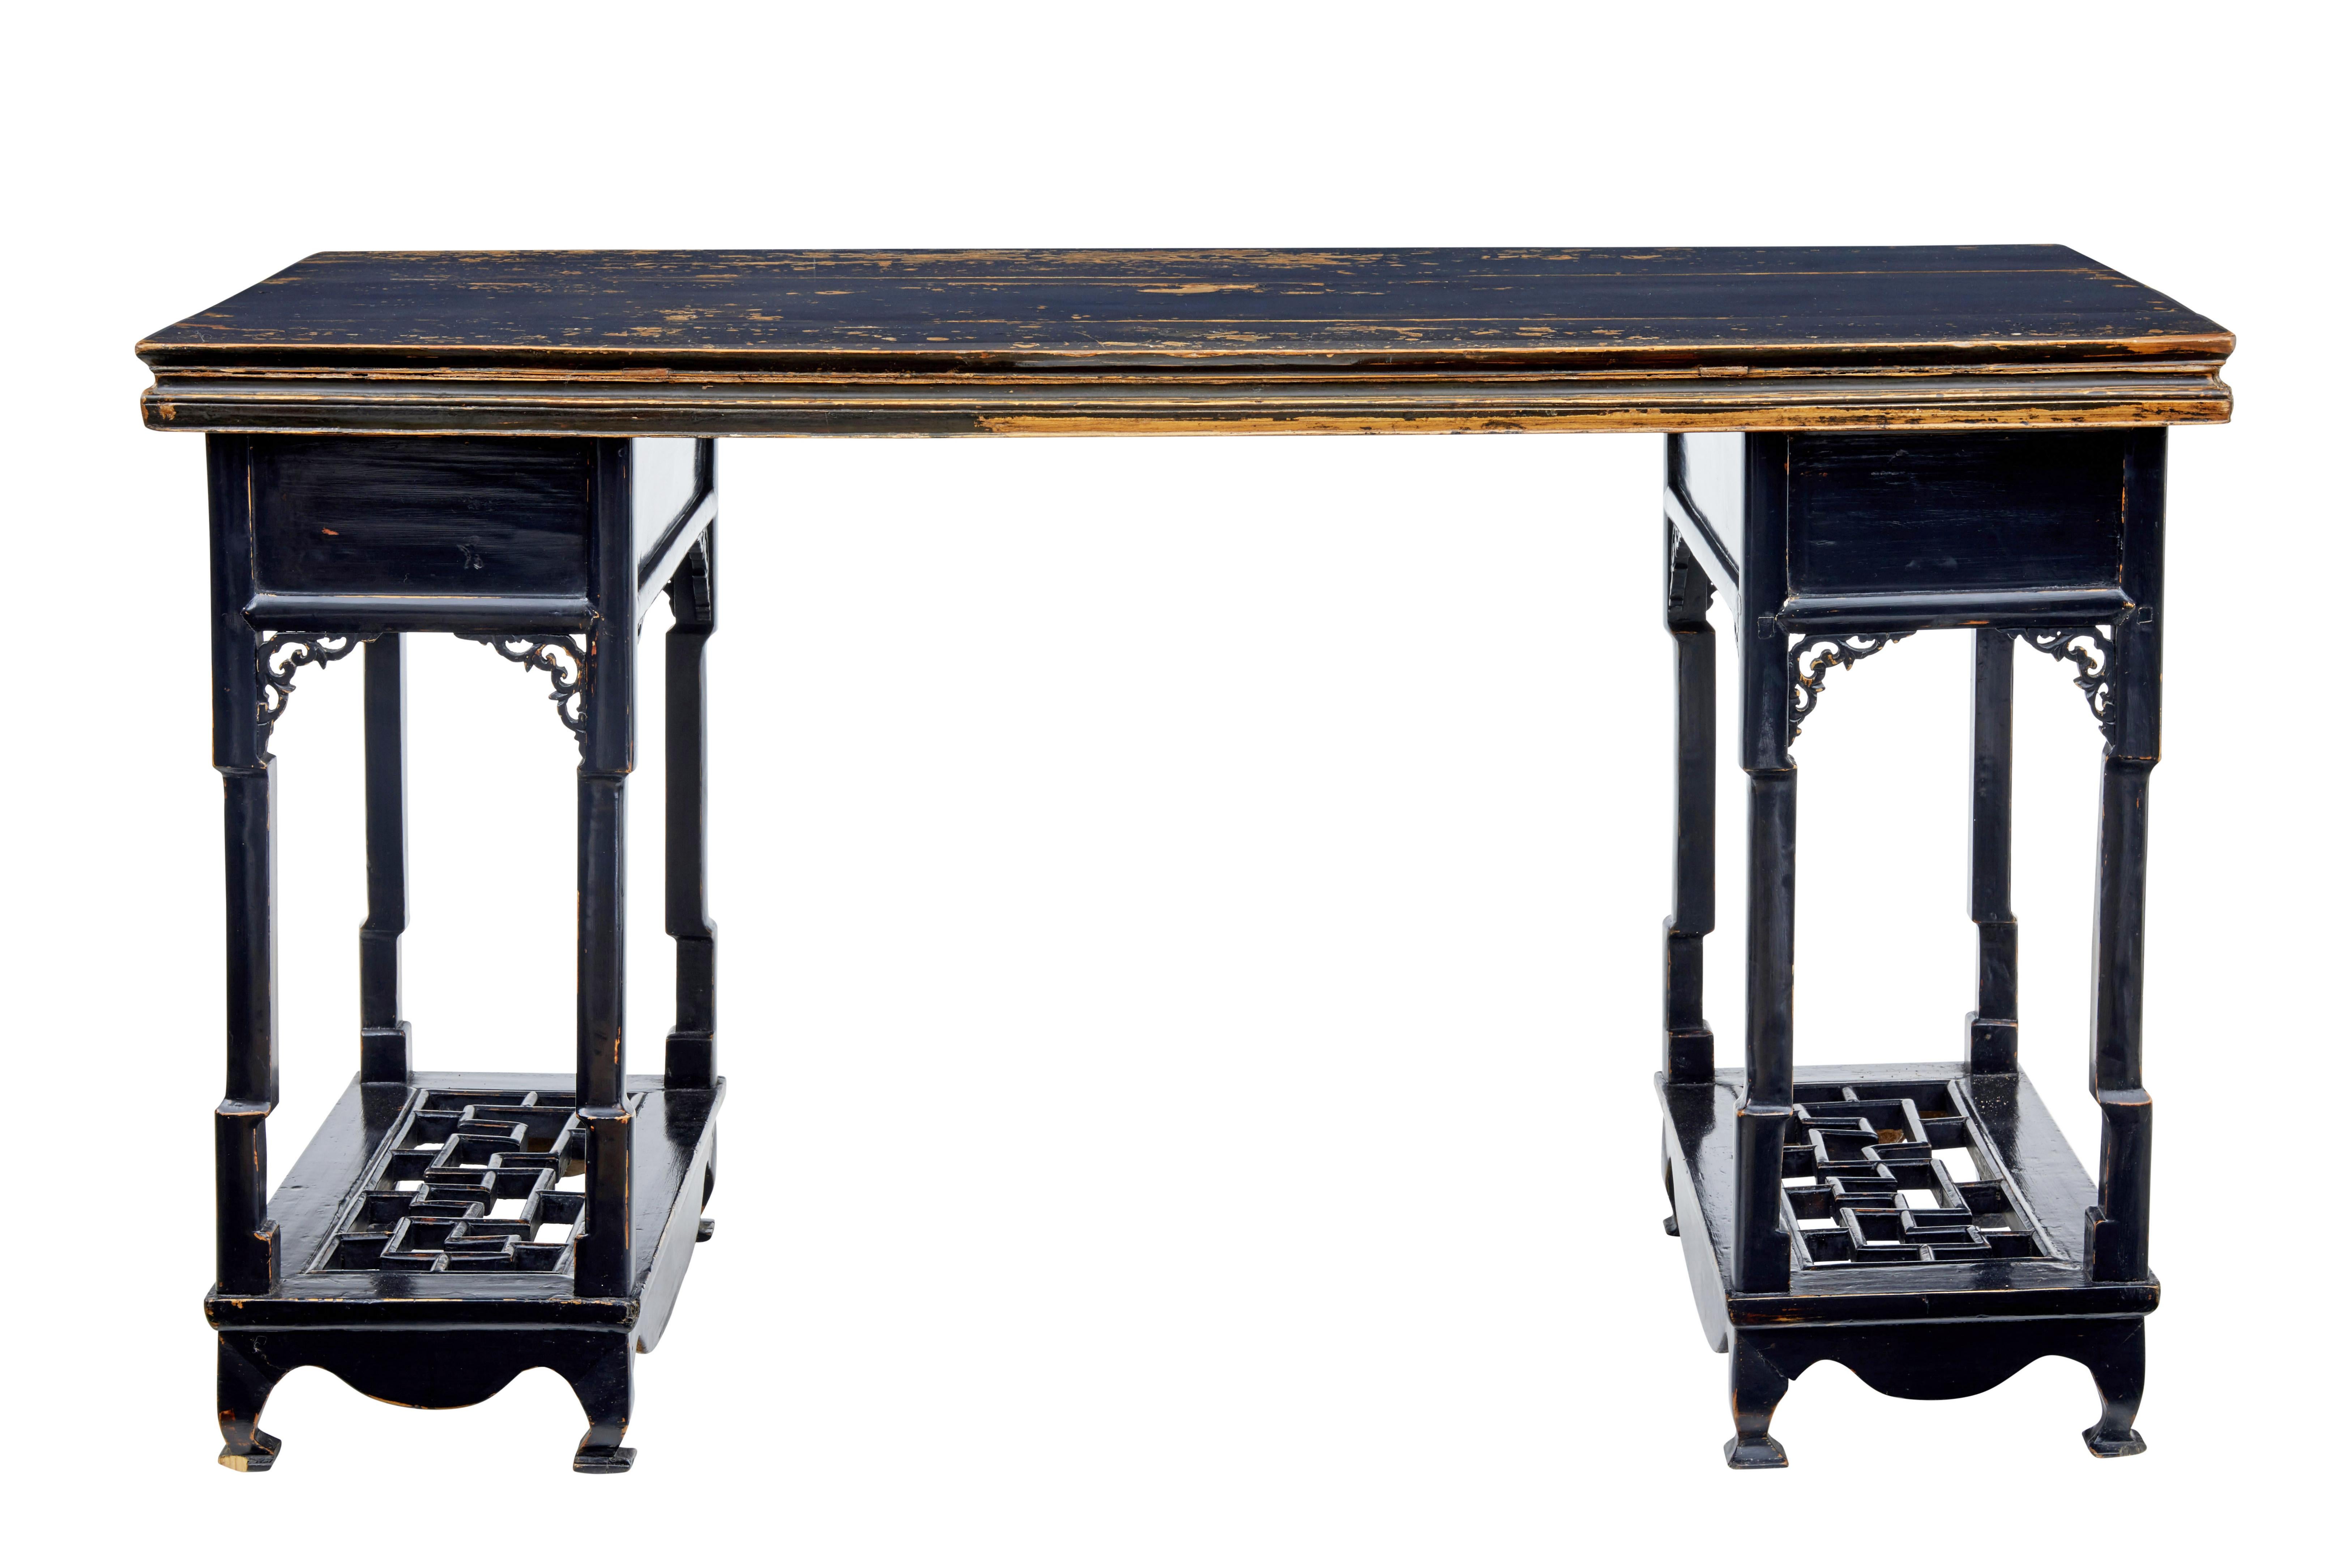 Hand-Crafted 19th Century Chinese Black Lacquered Desk